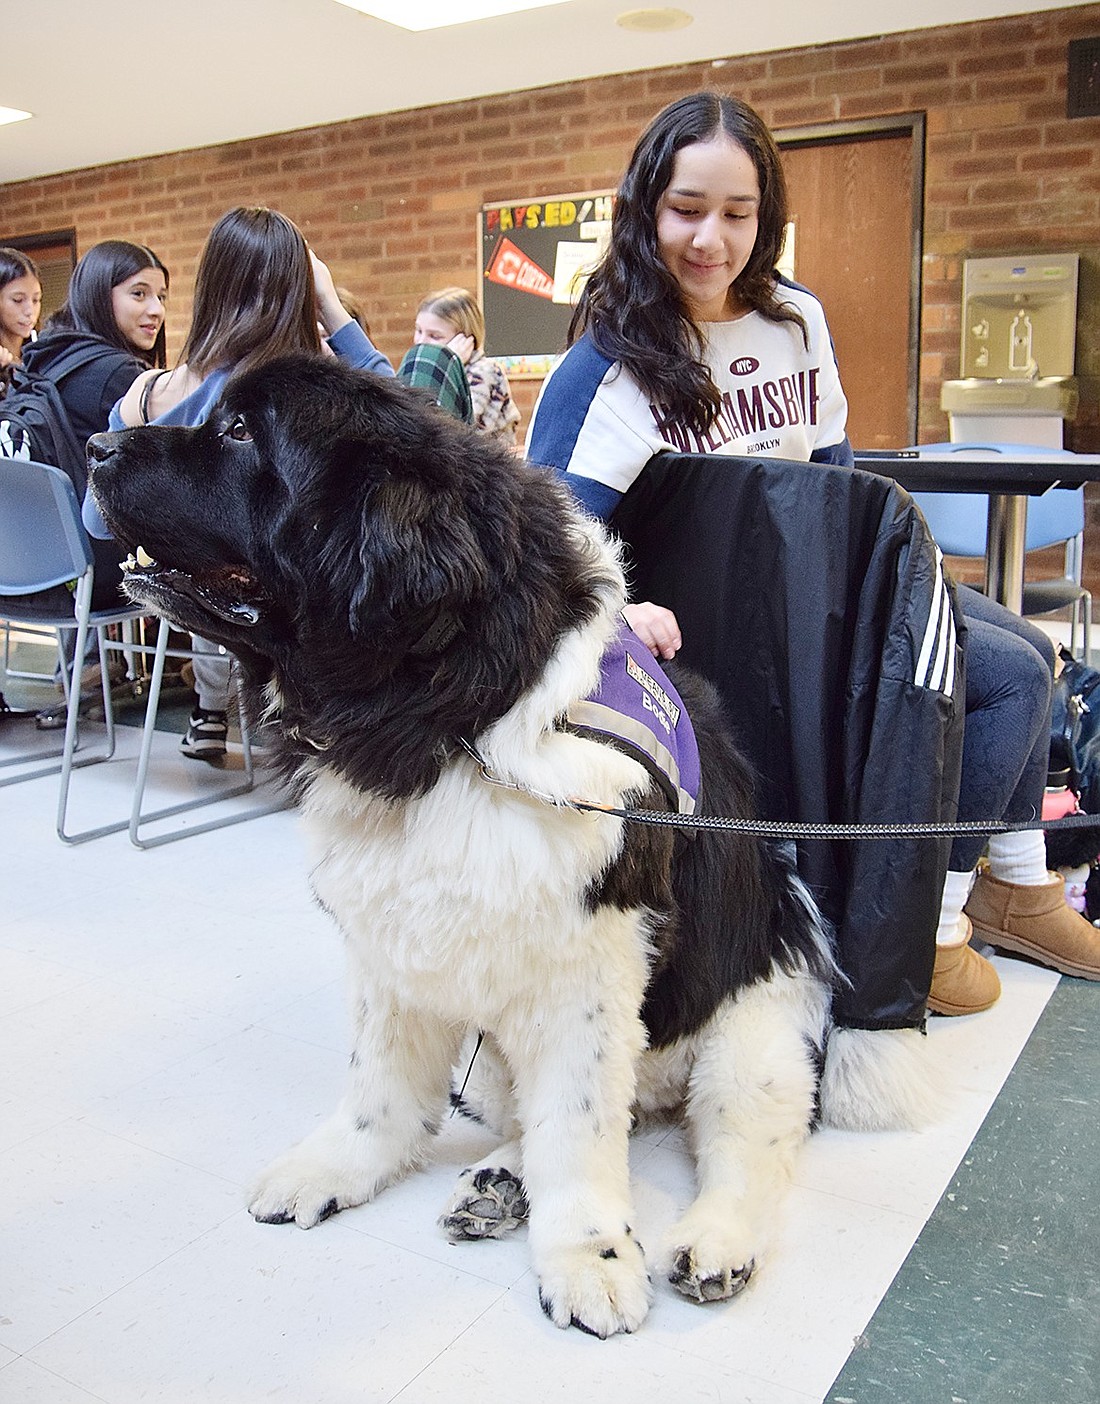 Maria Leyva, a Blind Brook High School junior, takes a moment away from lunch to pet Bodie, a 140-pound Newfoundland visiting the building on Tuesday, Apr. 9. Bodie is a therapy dog who makes regular appearances at the school during Wellness Week.